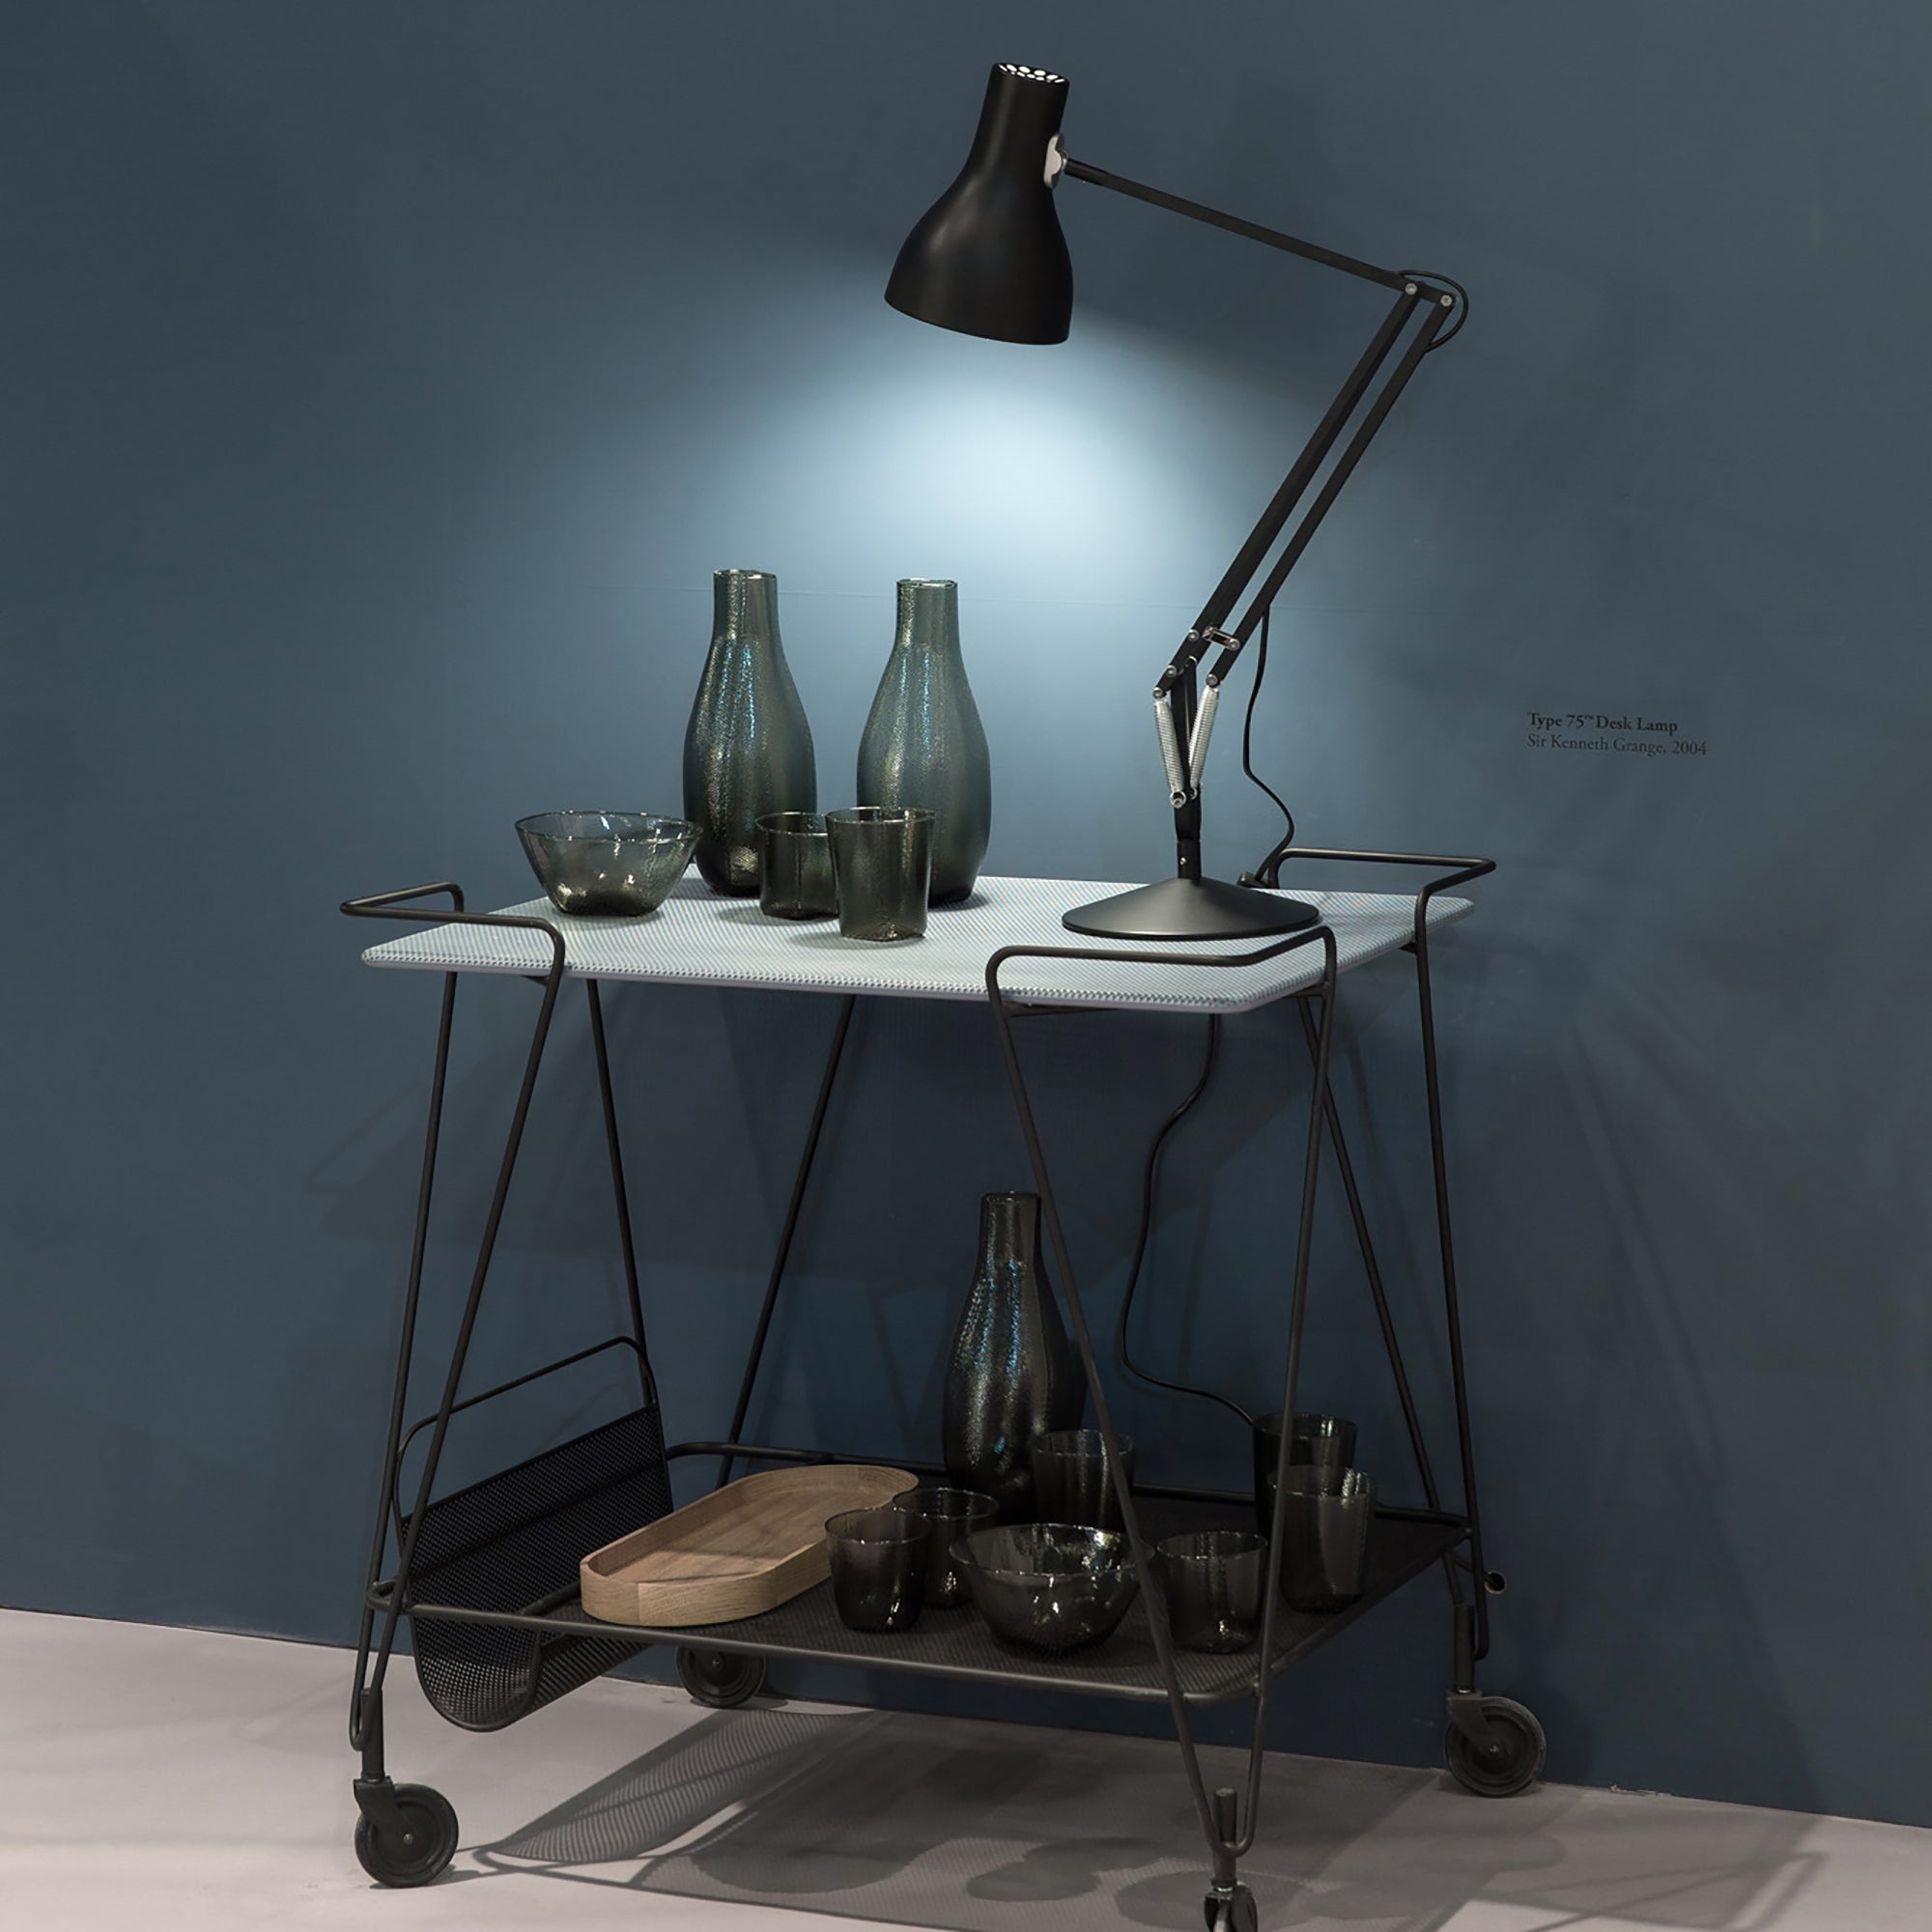 Type 75 Desk Lamp | Buy Anglepoise online at A+R